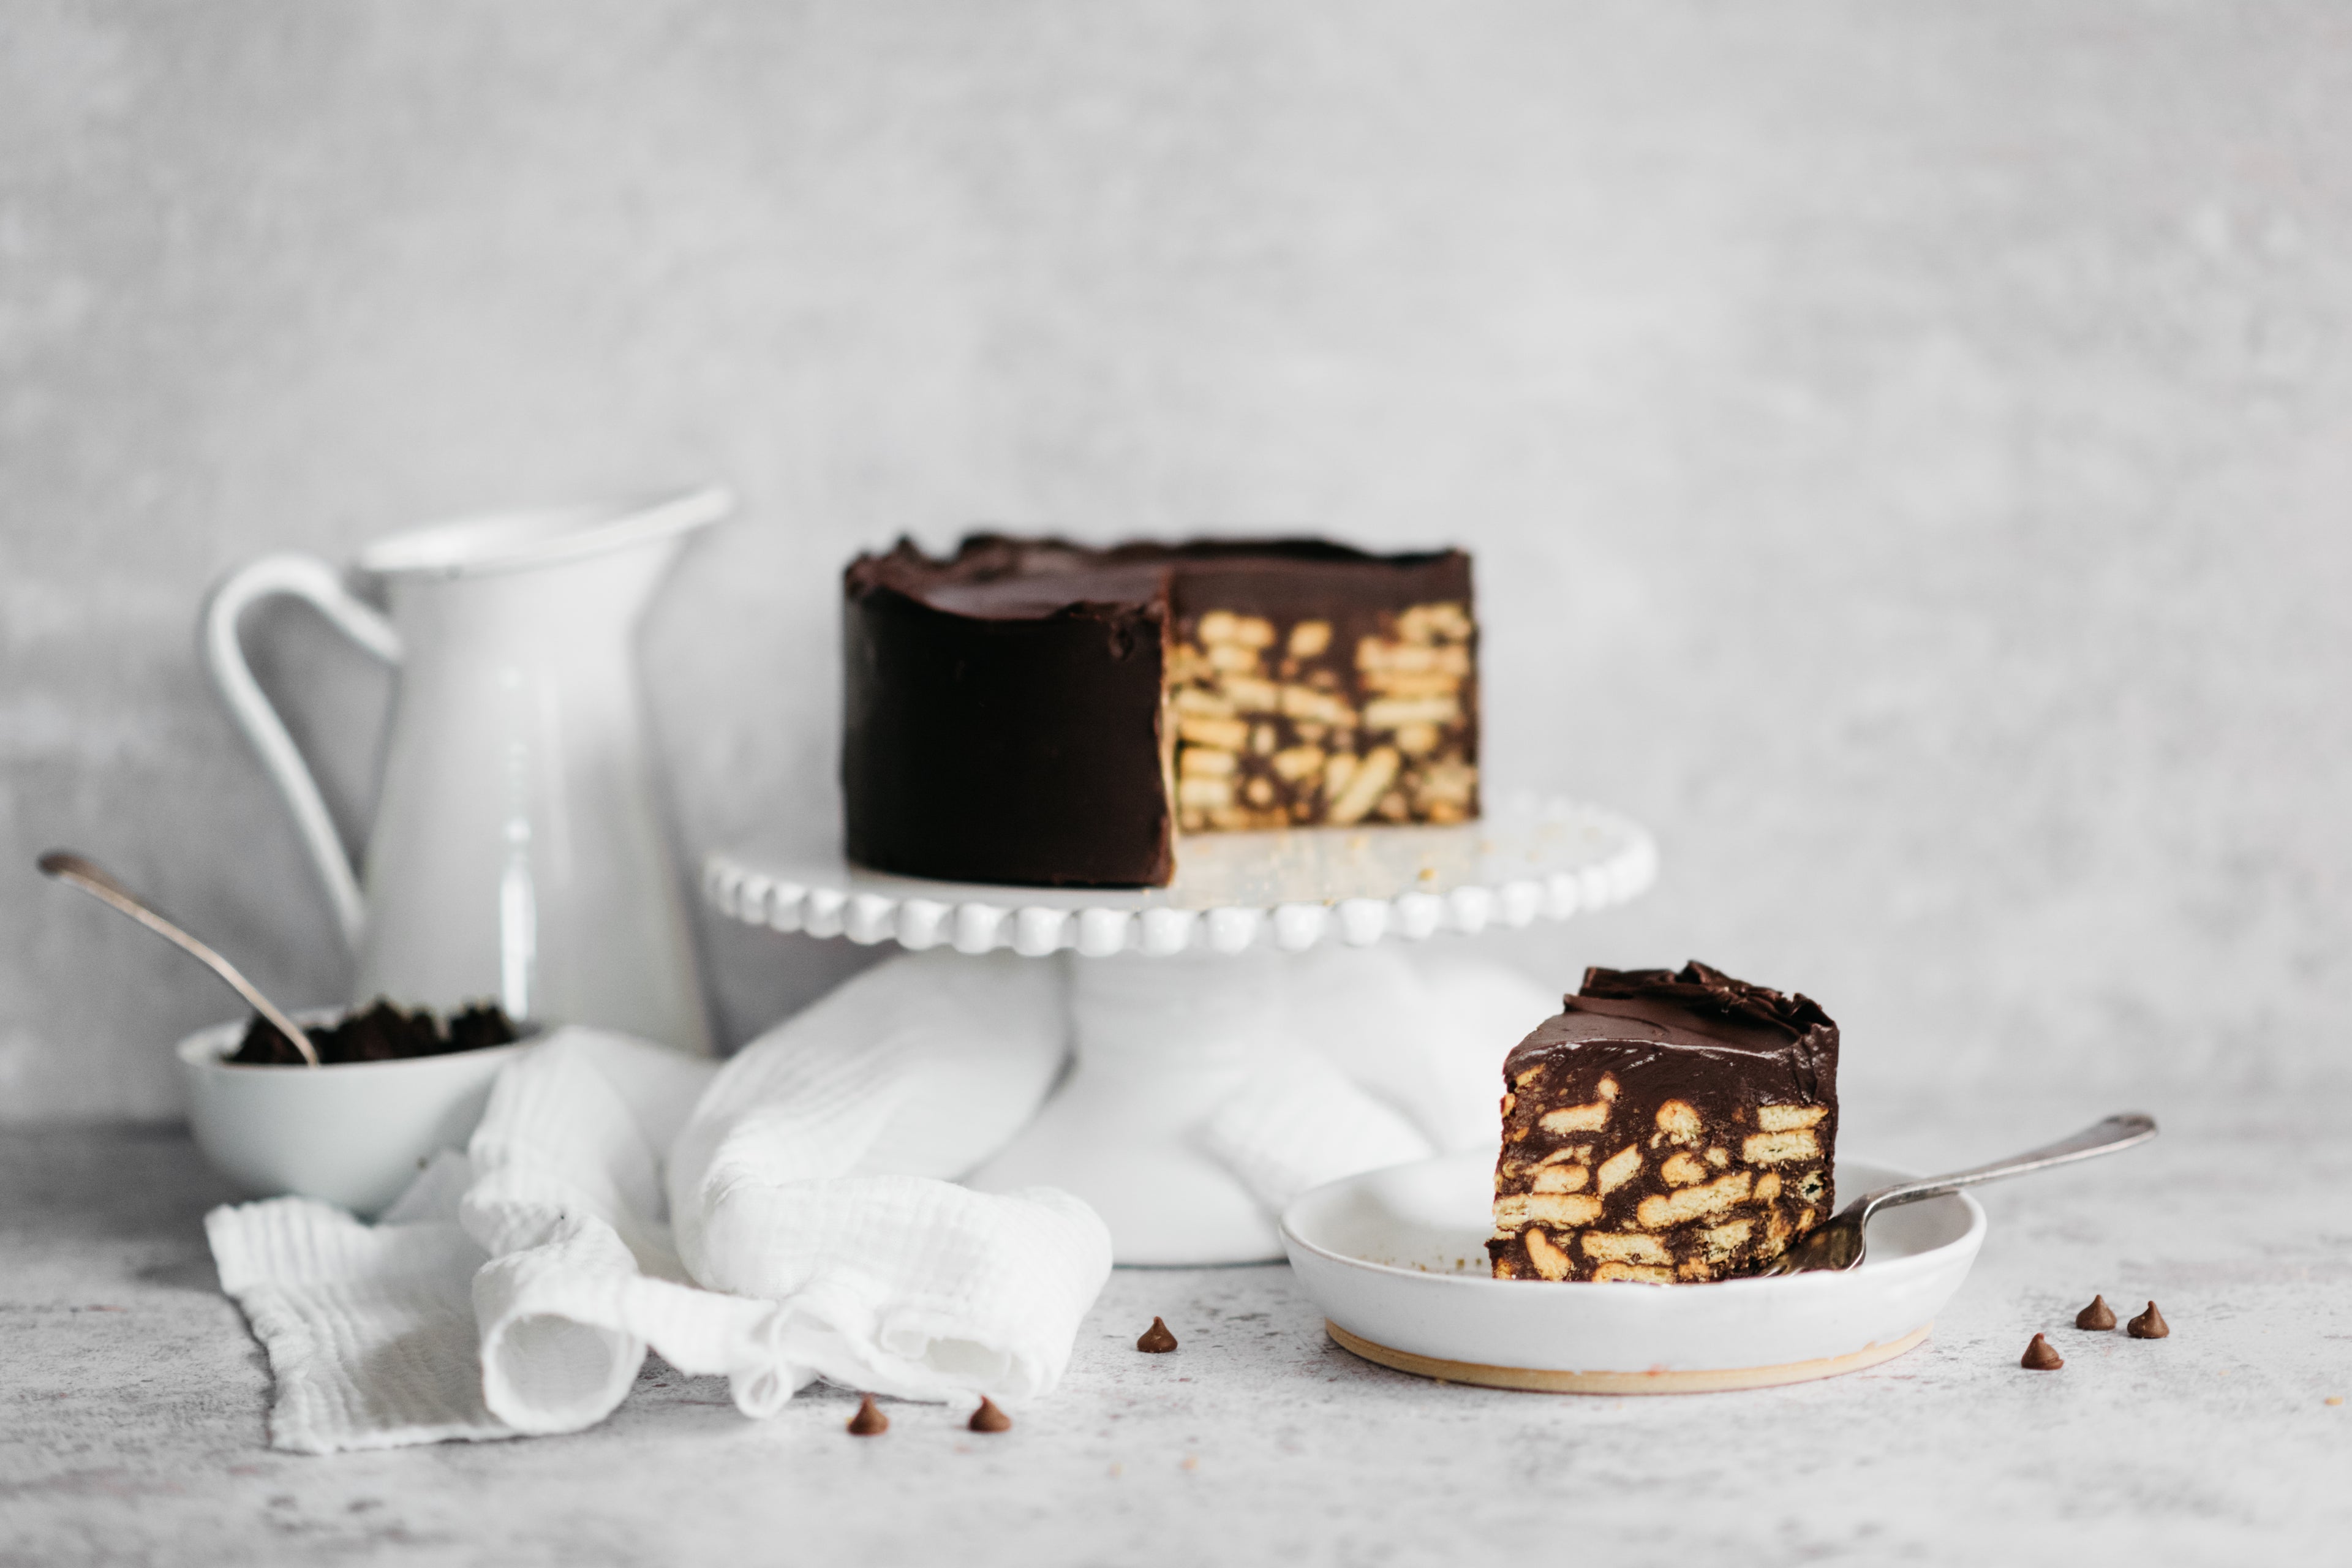 Chocolate Biscuit Cake on a cake stand with a slice cut out showing the rich tea biscuits inside